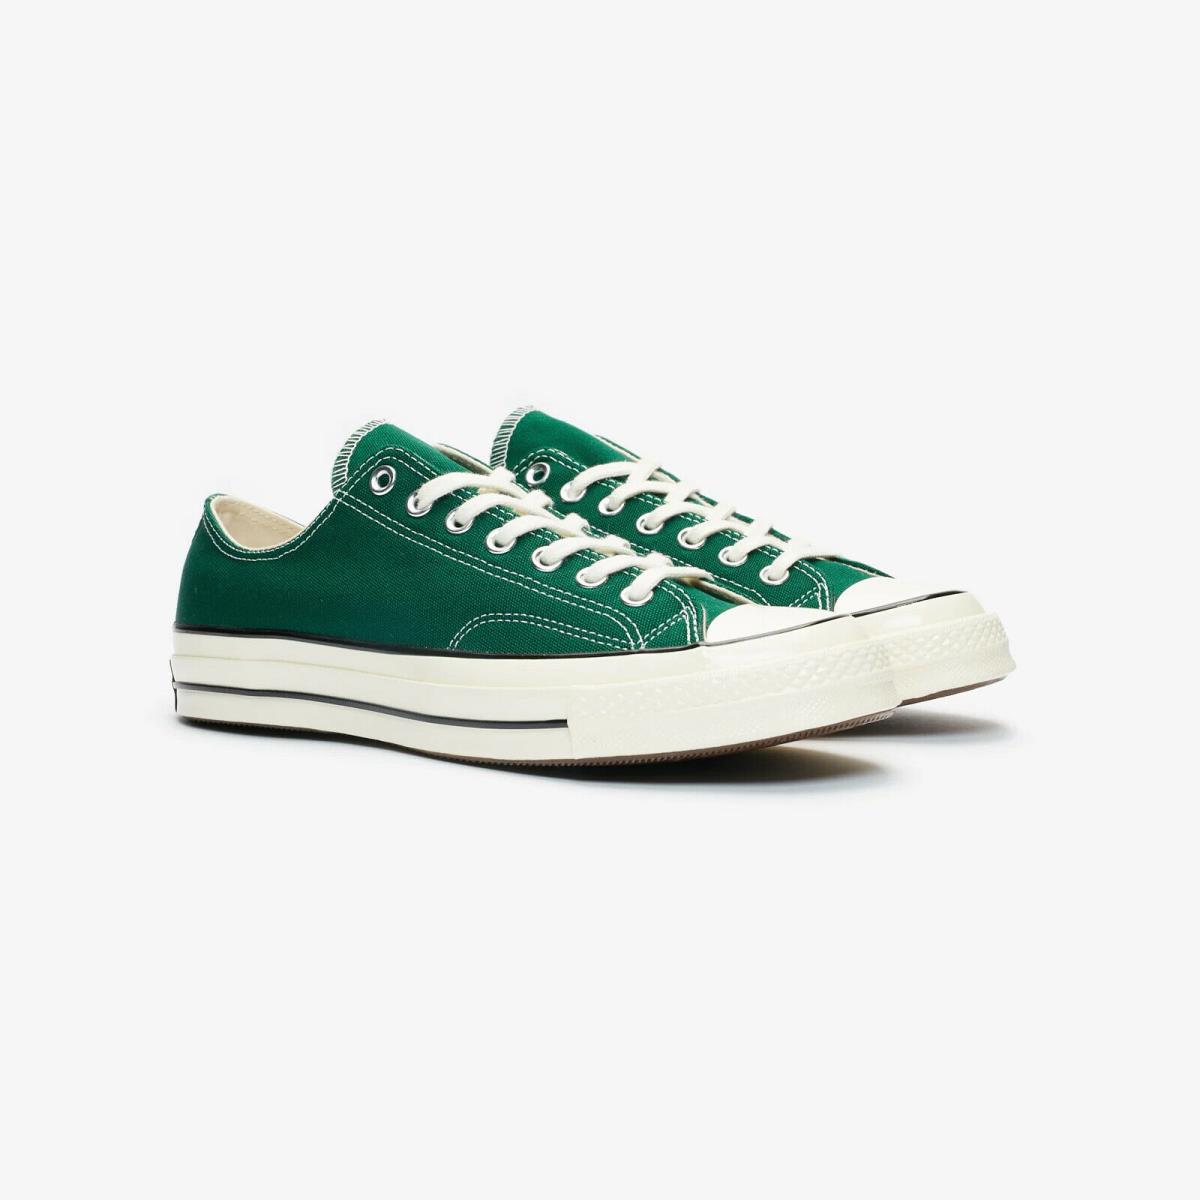 Converse Chuck Taylor 70 168513C Green White Sneaker Shoes AMRS1069 Size 11